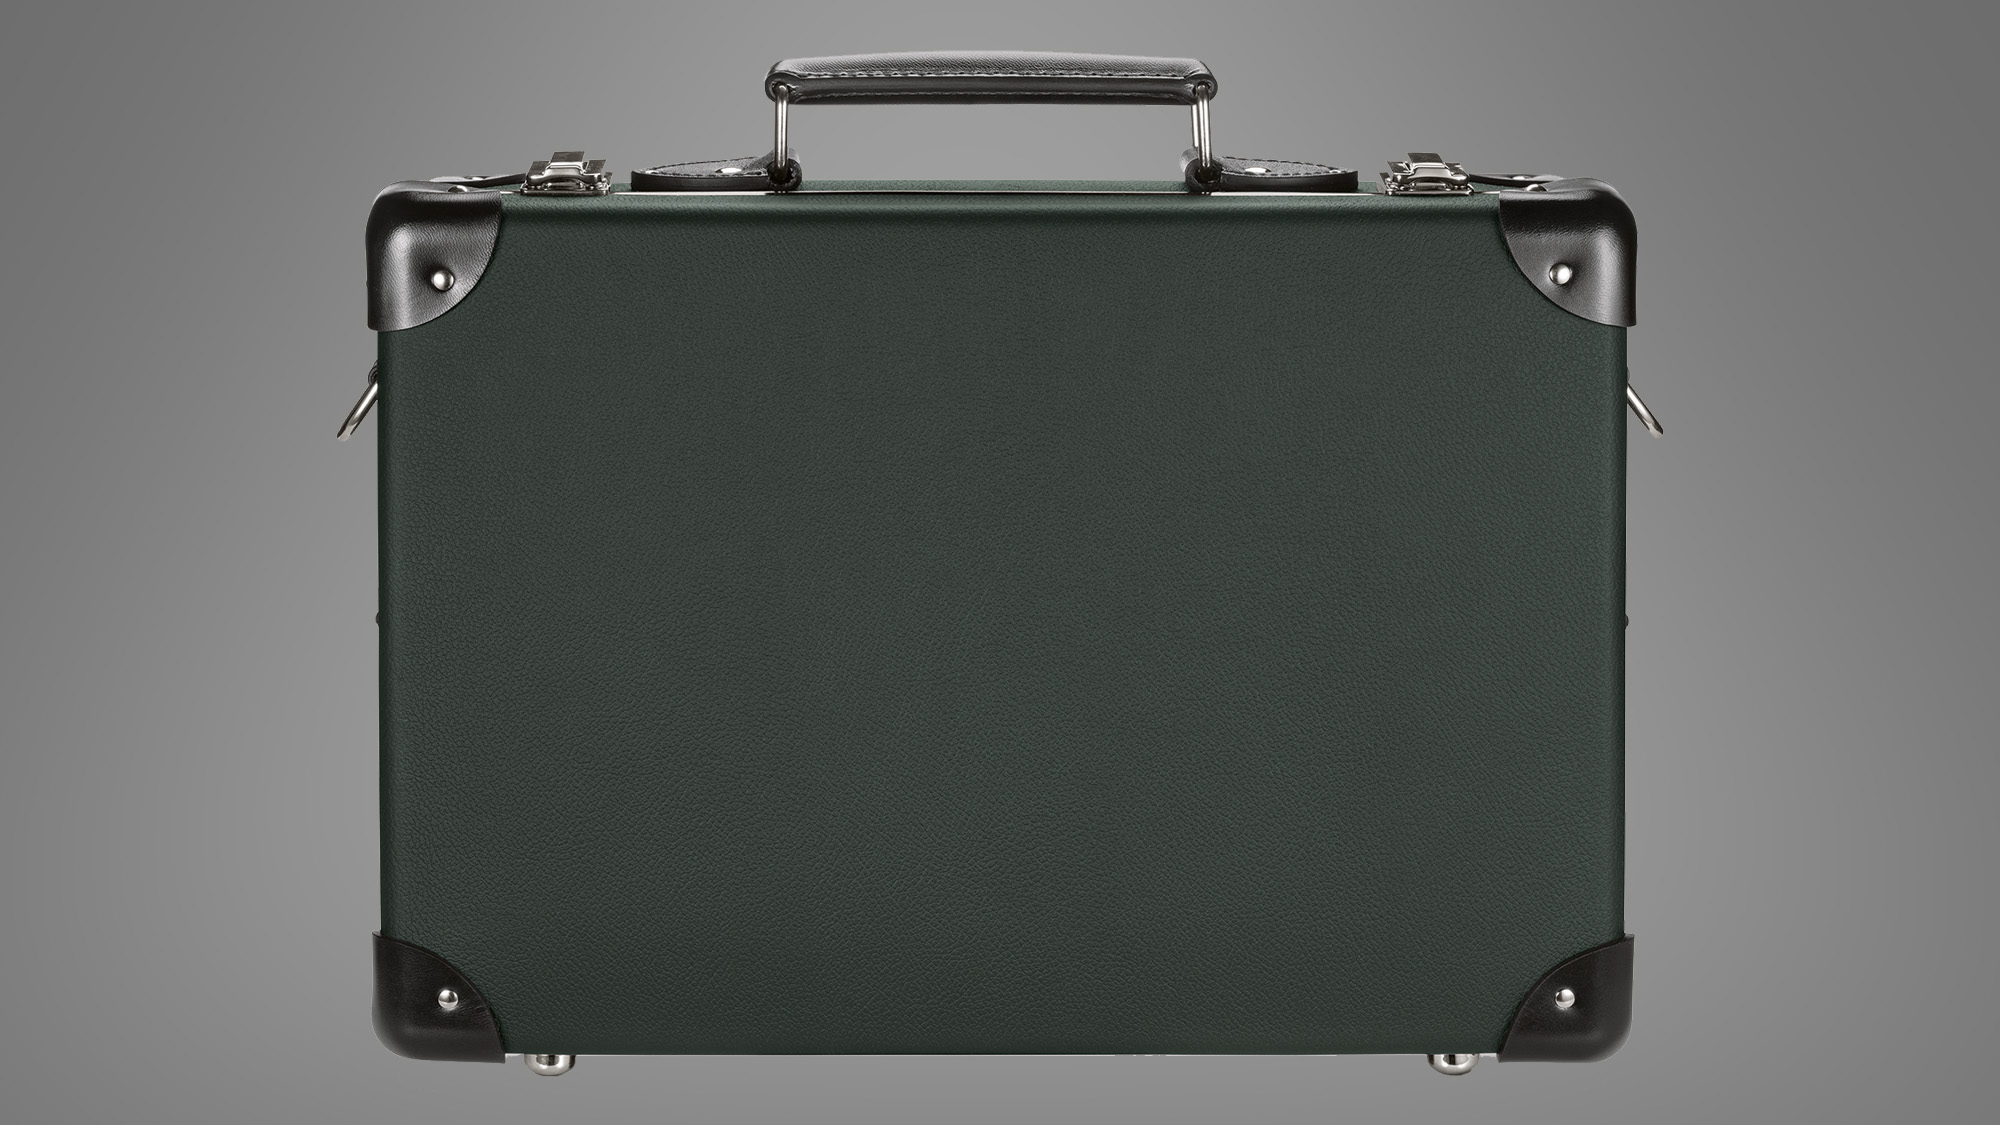 The suitcase for the Leica Q2 007 edition camera